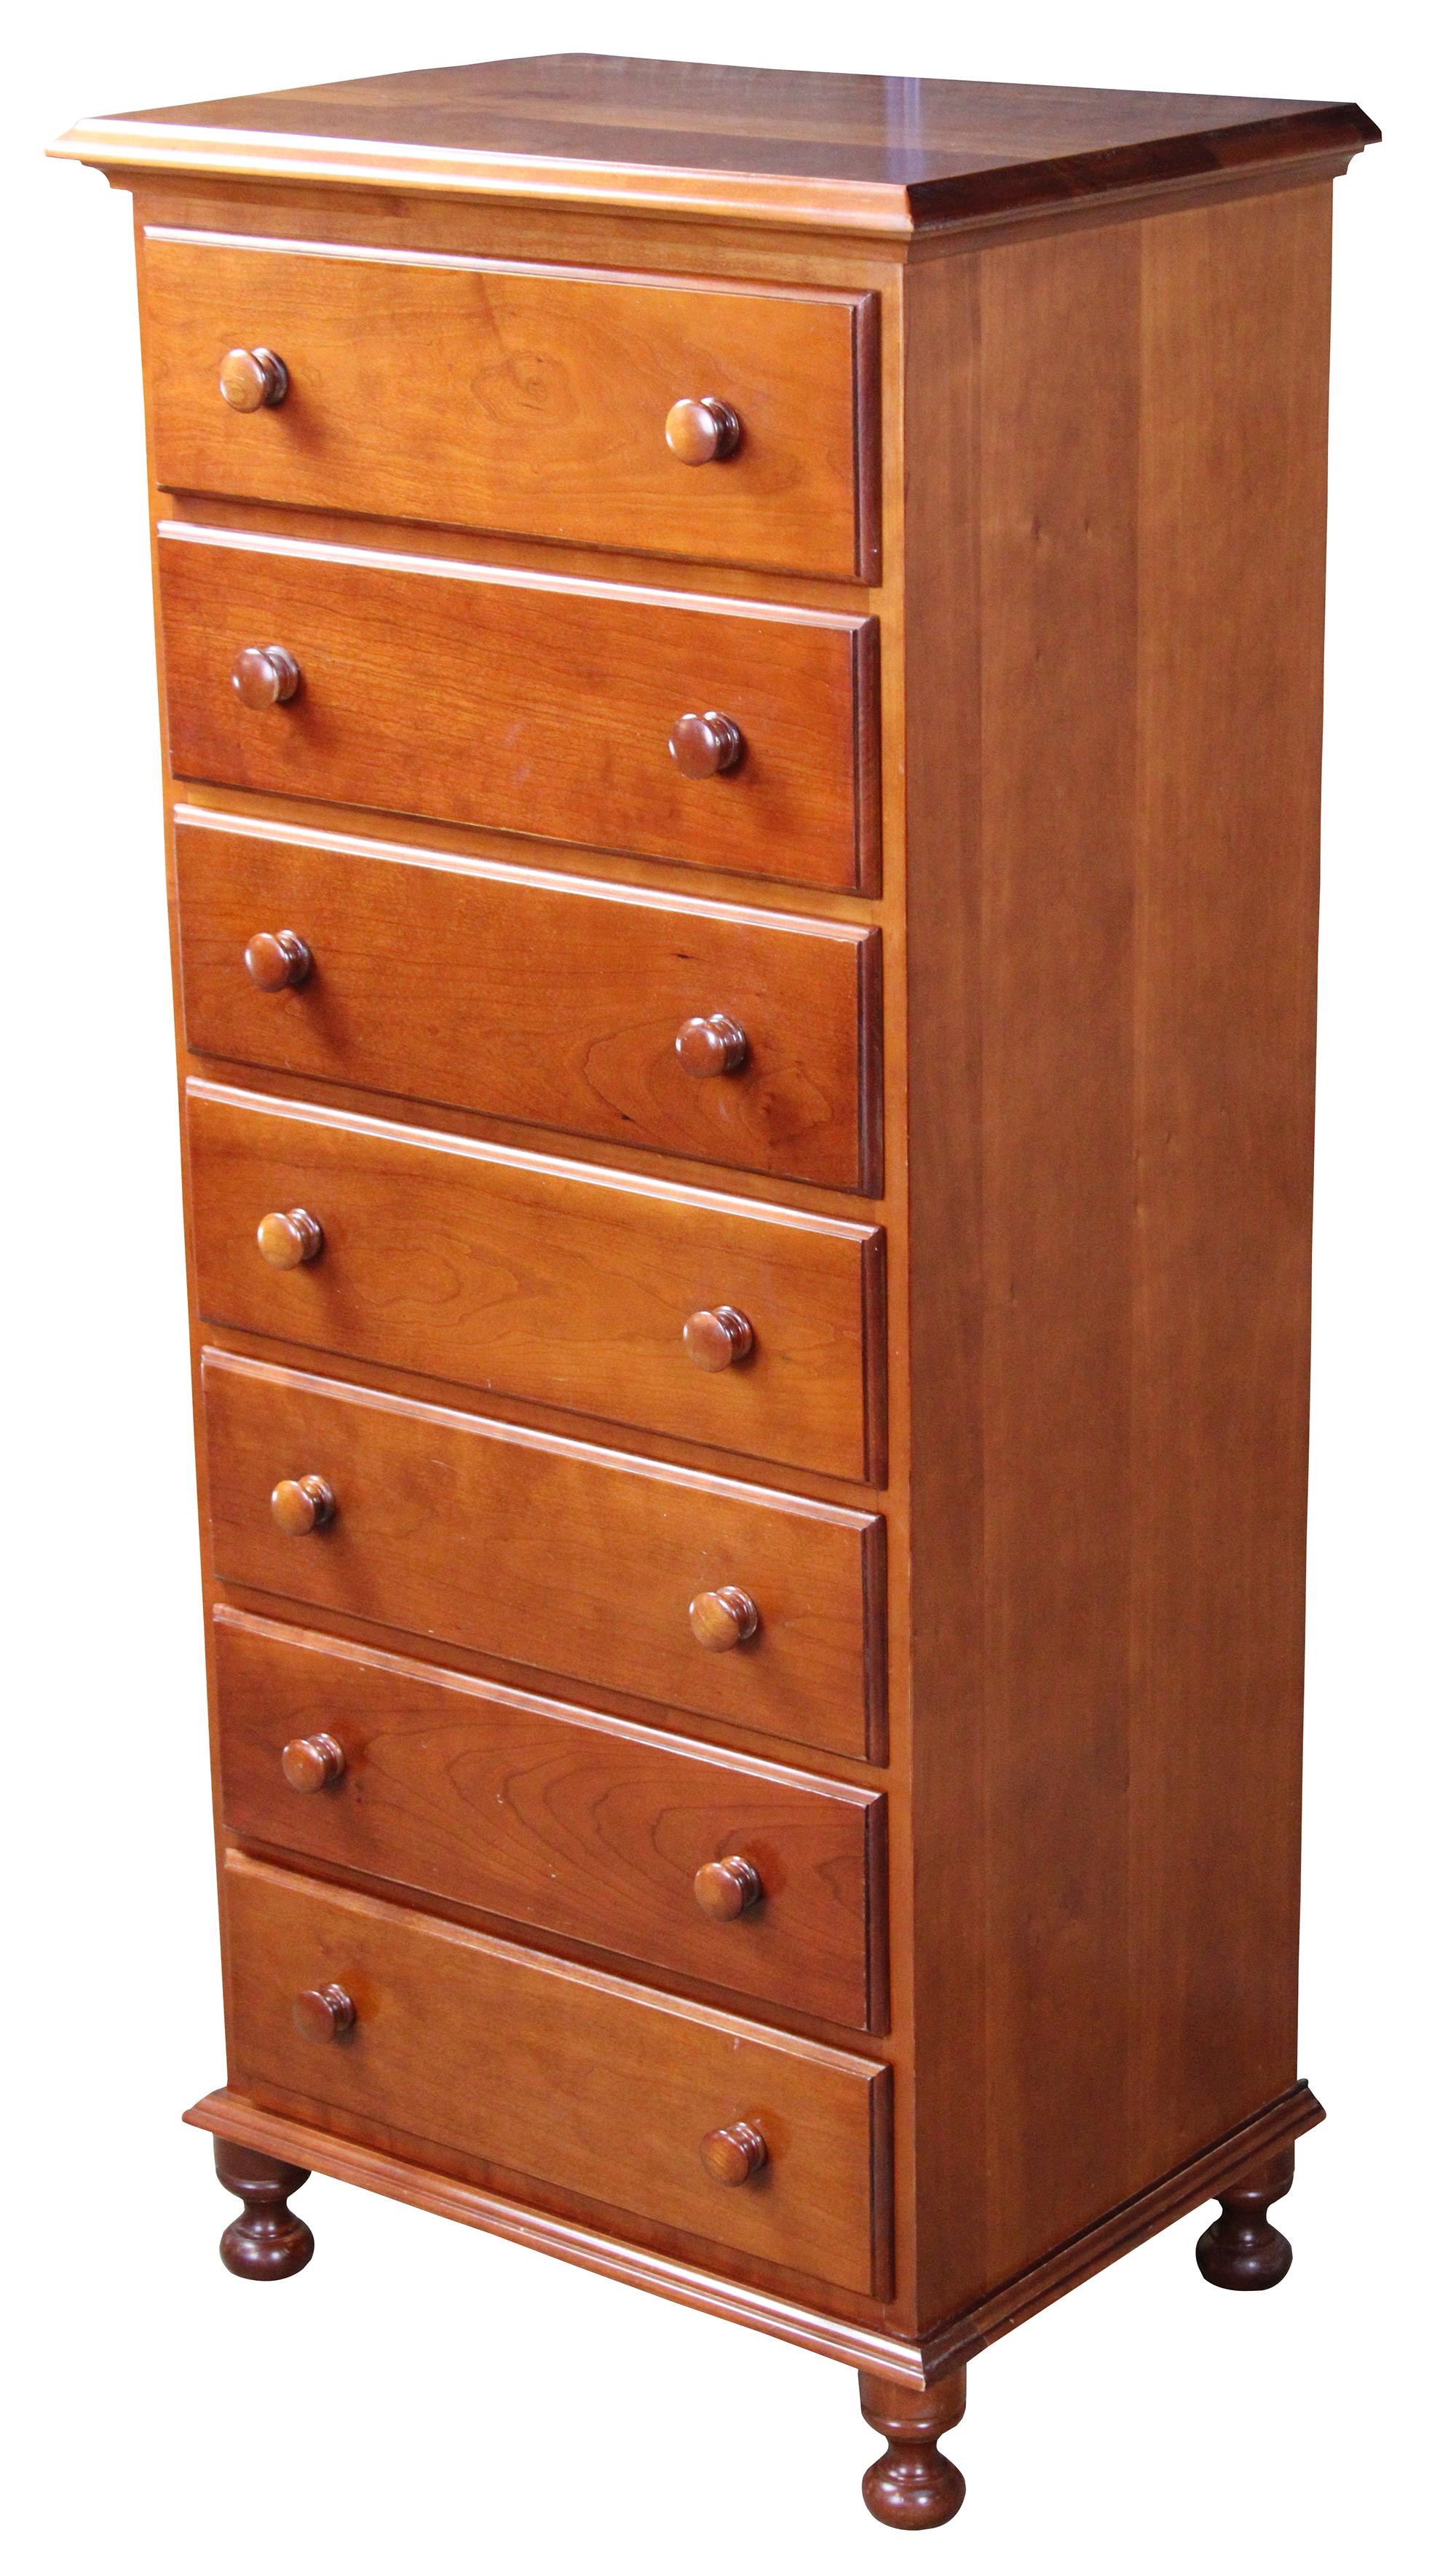 Vintage Cassady Furniture Co solid cherry semainier chest. An early American reproduction featuring seven dovetailed drawers and bun feet. Cassady Furniture is out of Bowling Green Kentucky, circa 1980s.
       